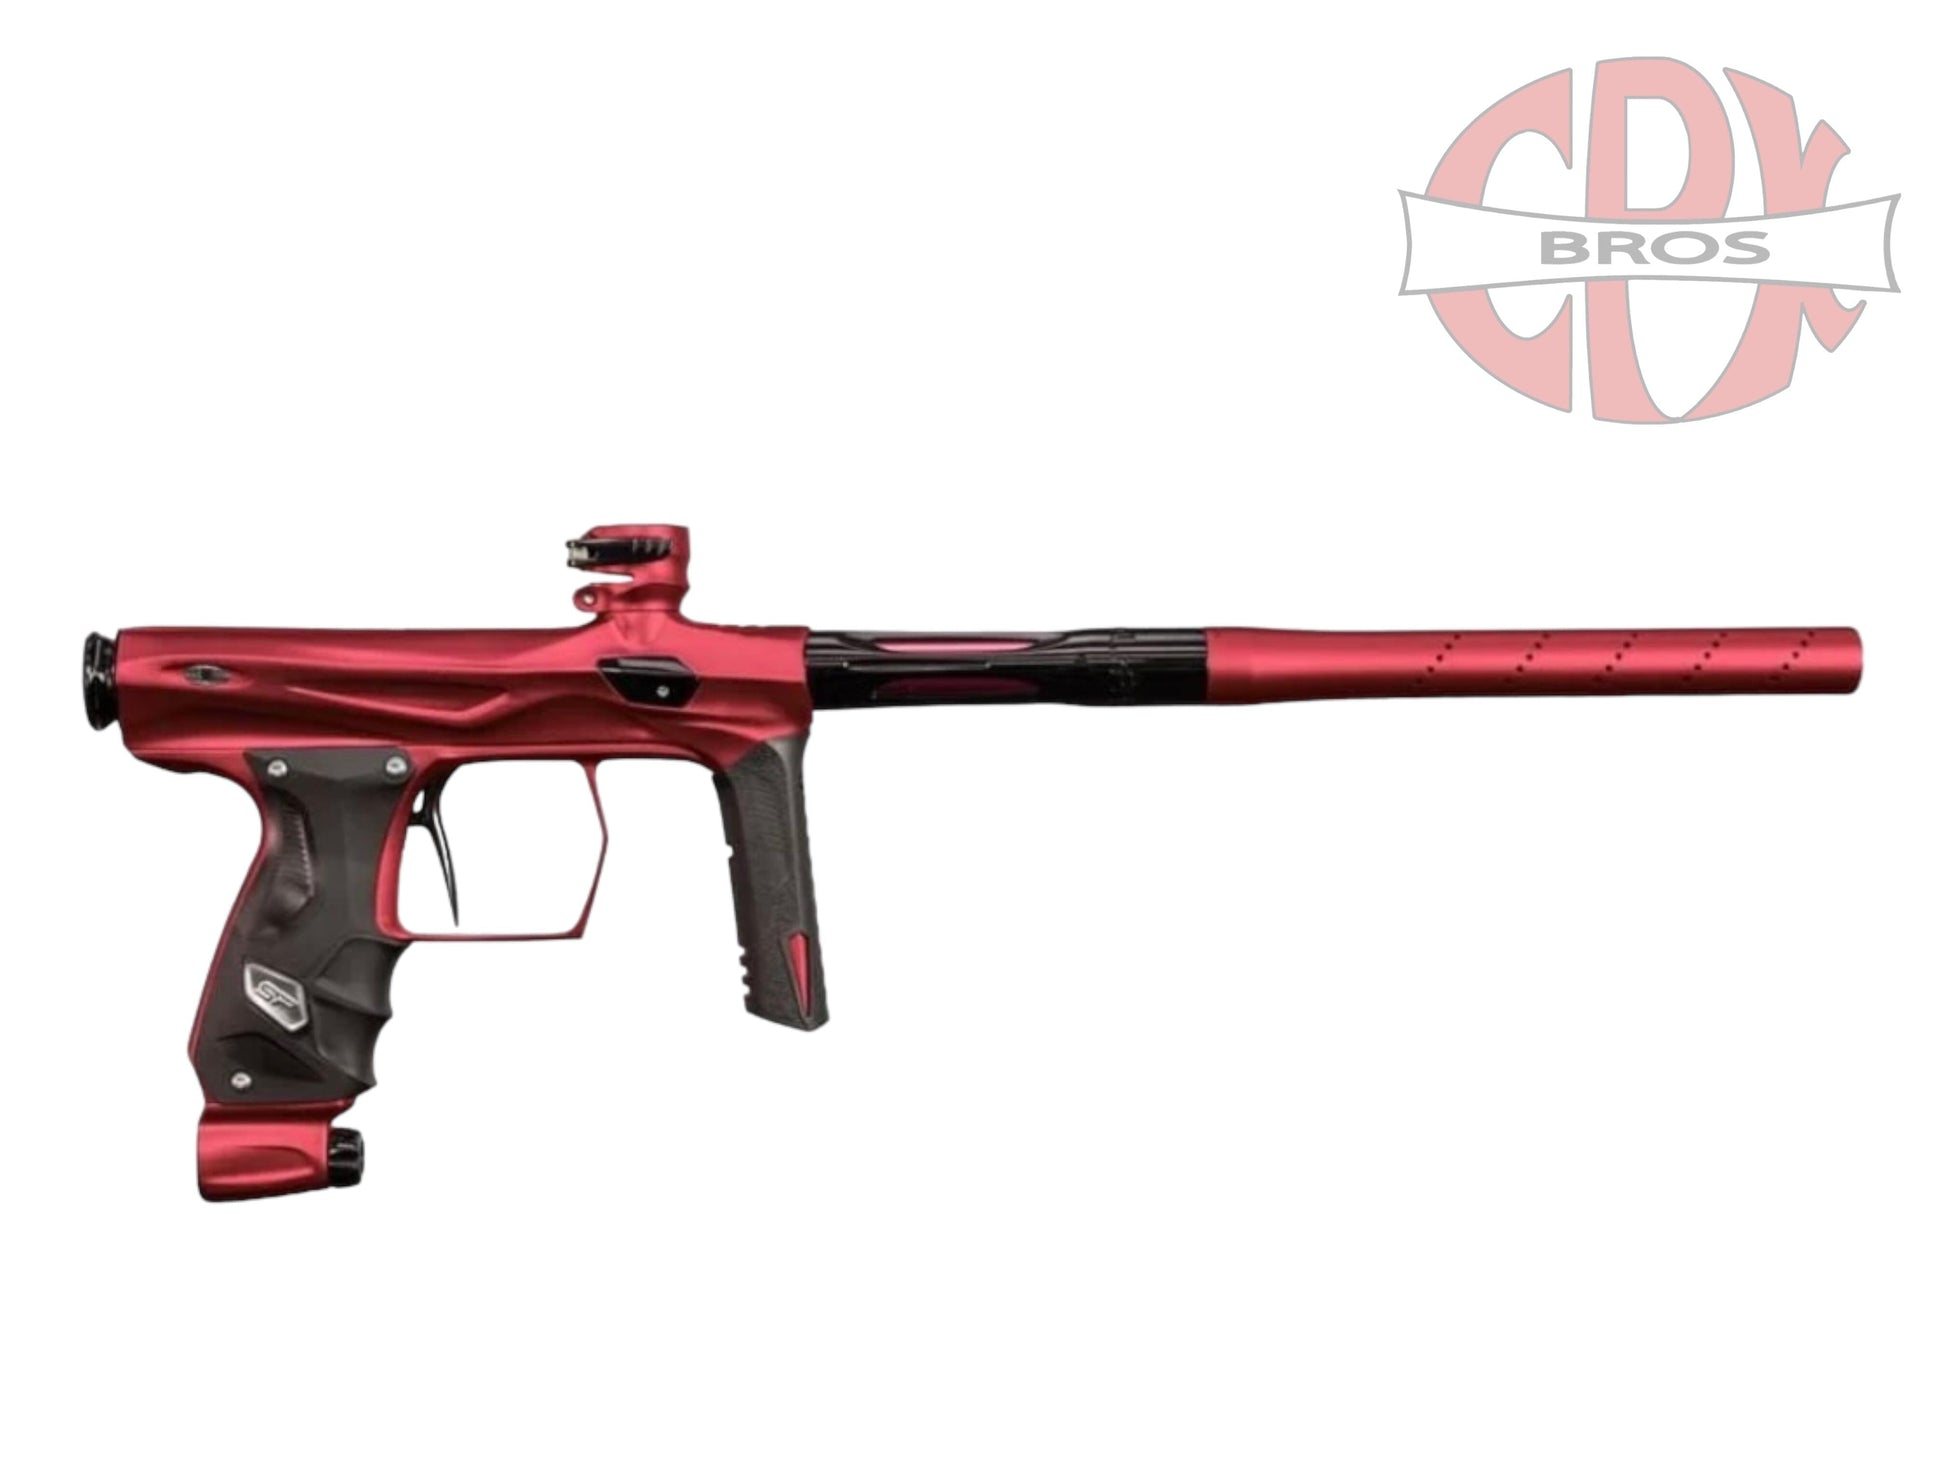 Used NEW SP Shocker AMP Red Paintball Gun from CPXBrosPaintball Buy/Sell/Trade Paintball Markers, Paintball Hoppers, Paintball Masks, and Hormesis Headbands